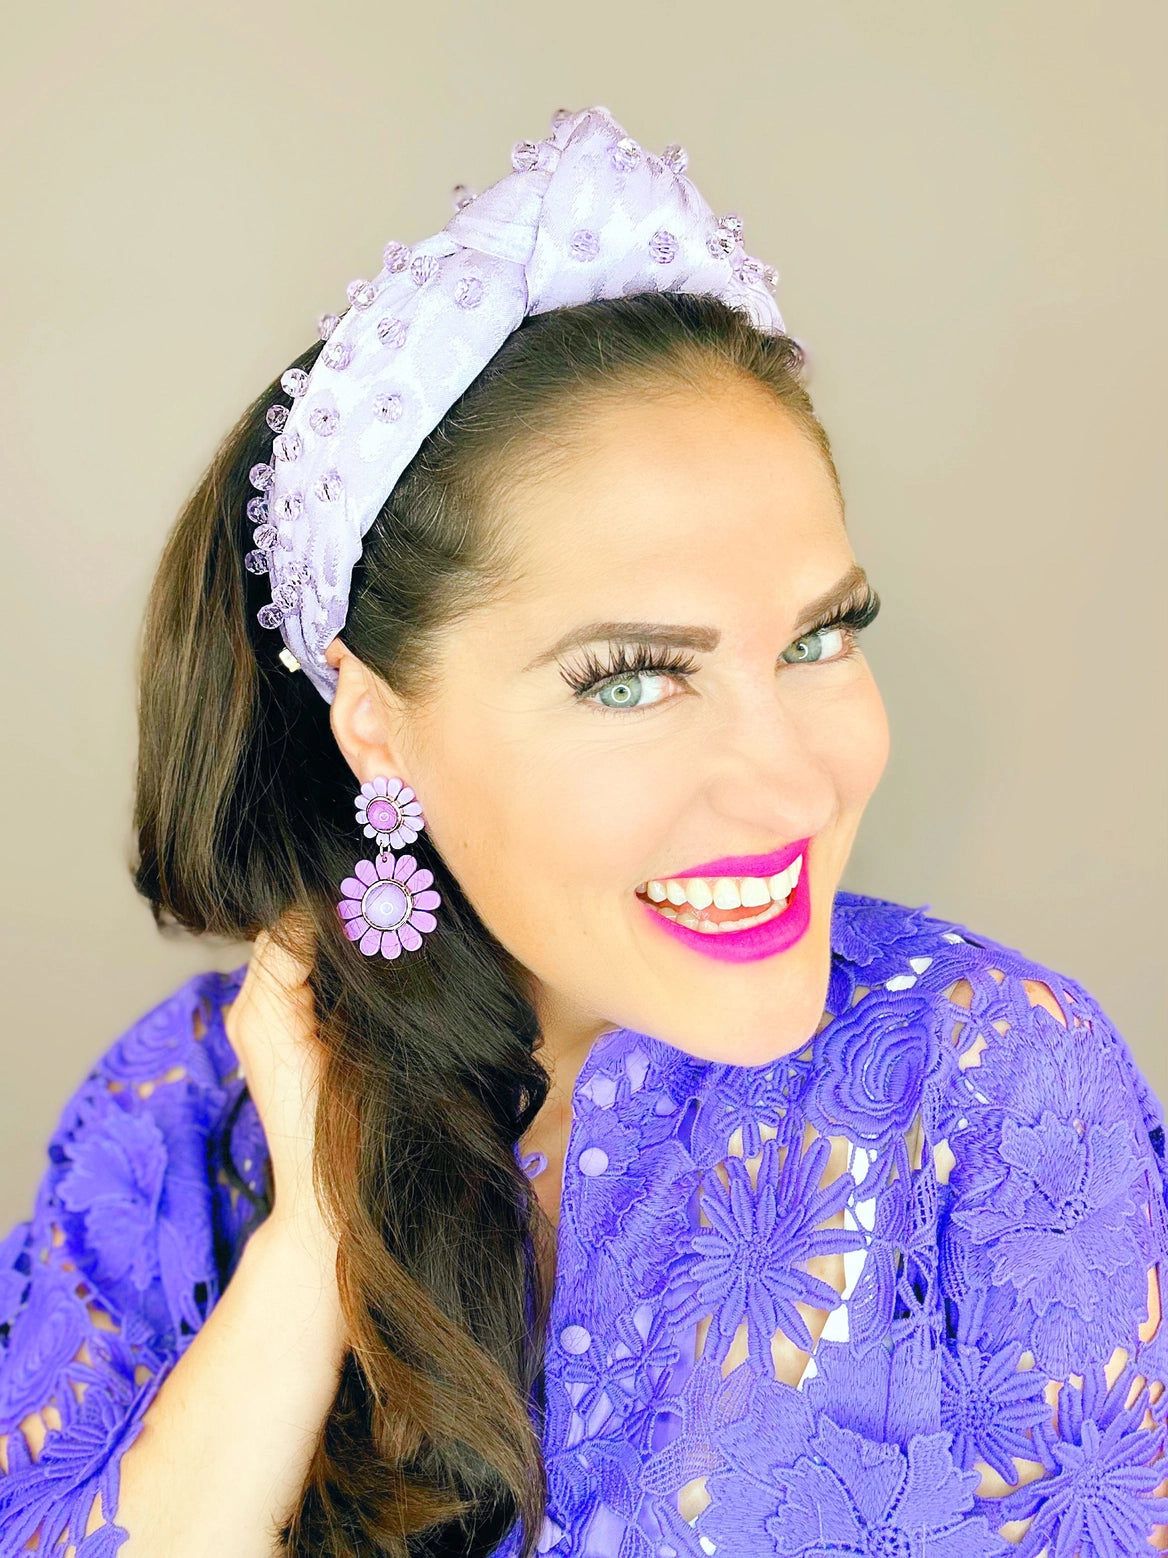 Lavender Spotted Headband with Crystals by Brianna Cannon